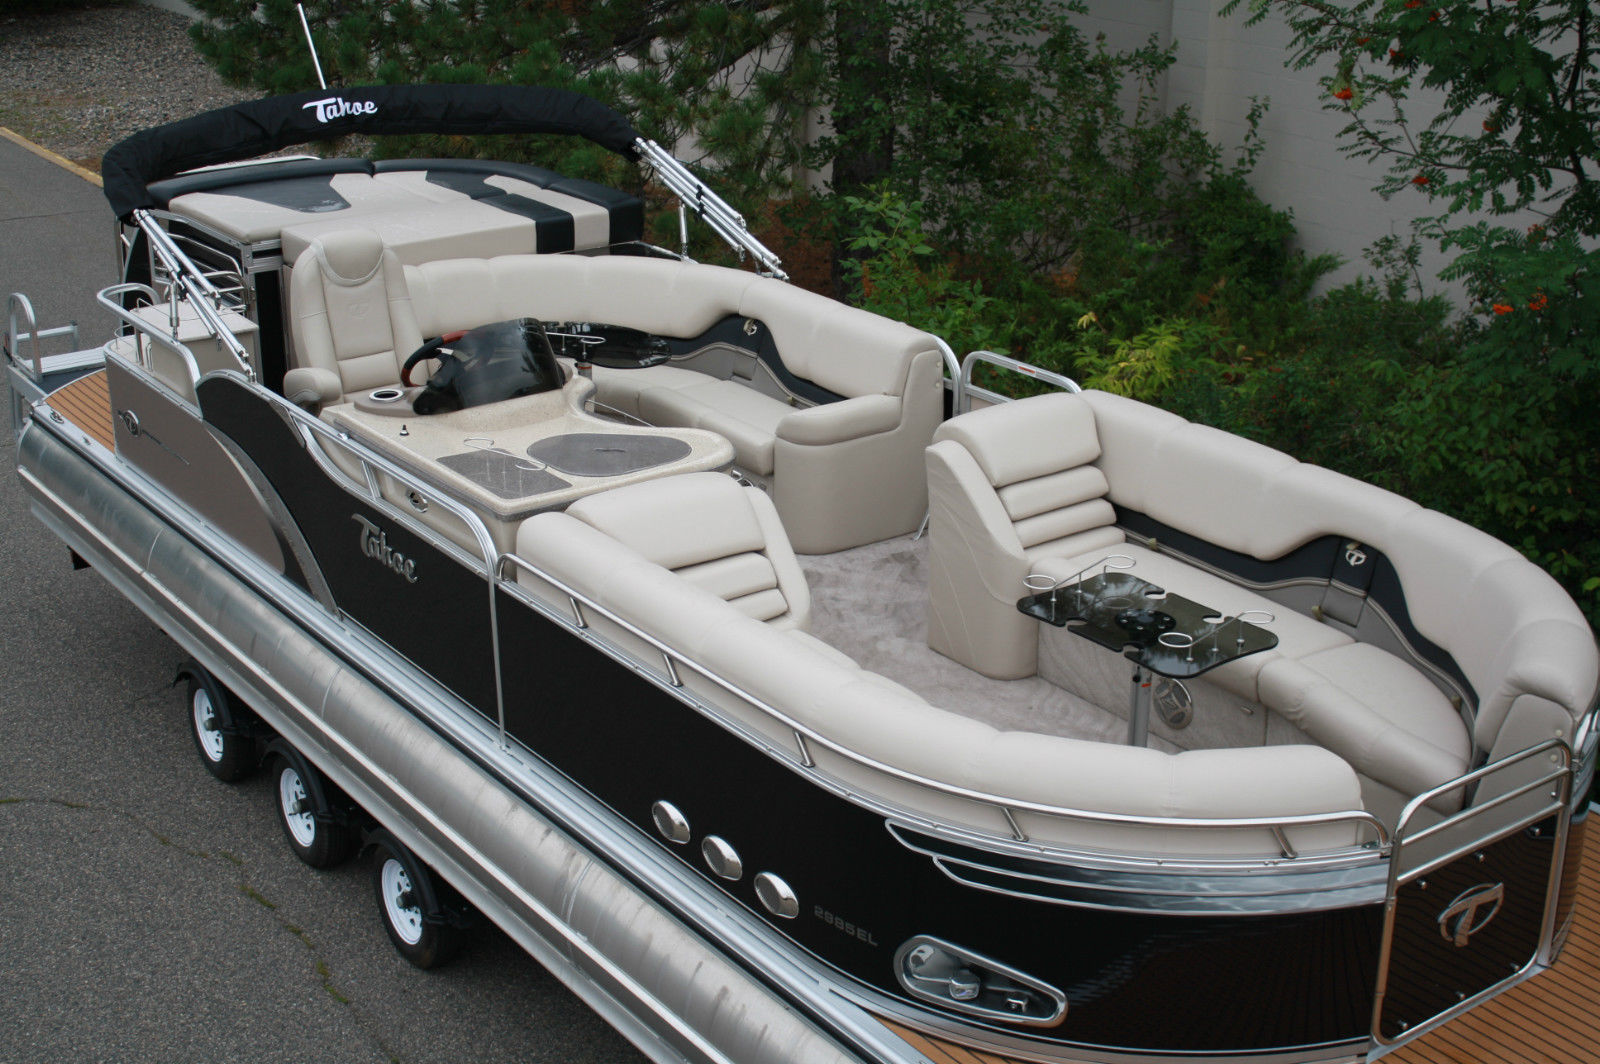 Special---New Triple Tube 29 Ft Pontoon Boat With 350 Hp 4 ...